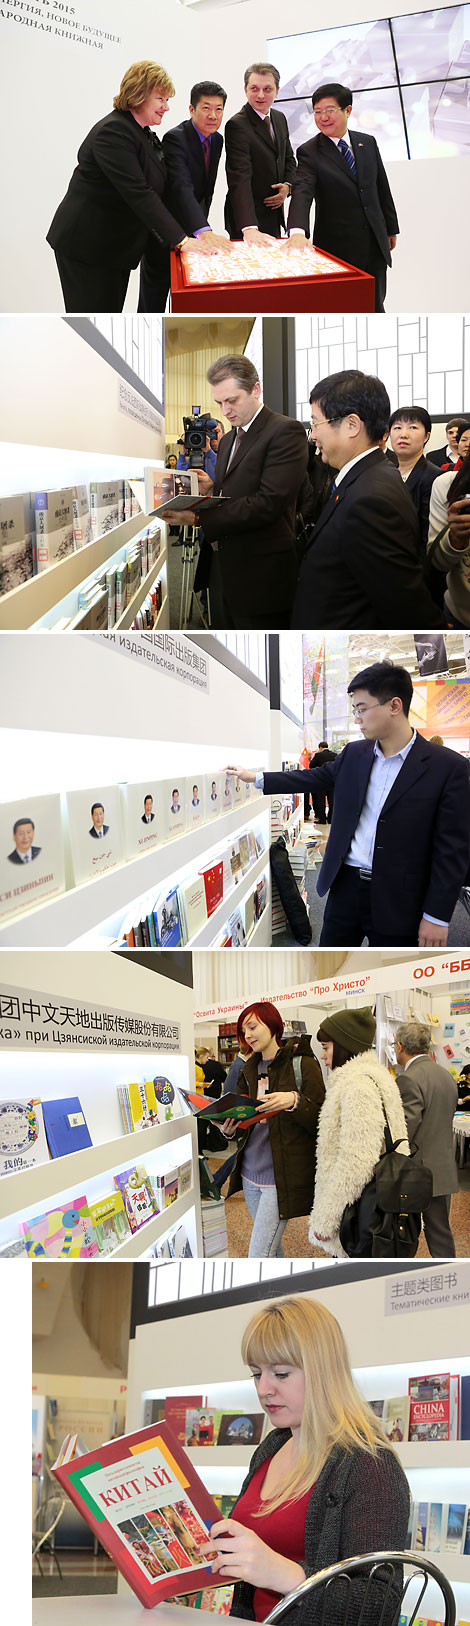 China is the Guest of Honor of the Minsk Book Fair